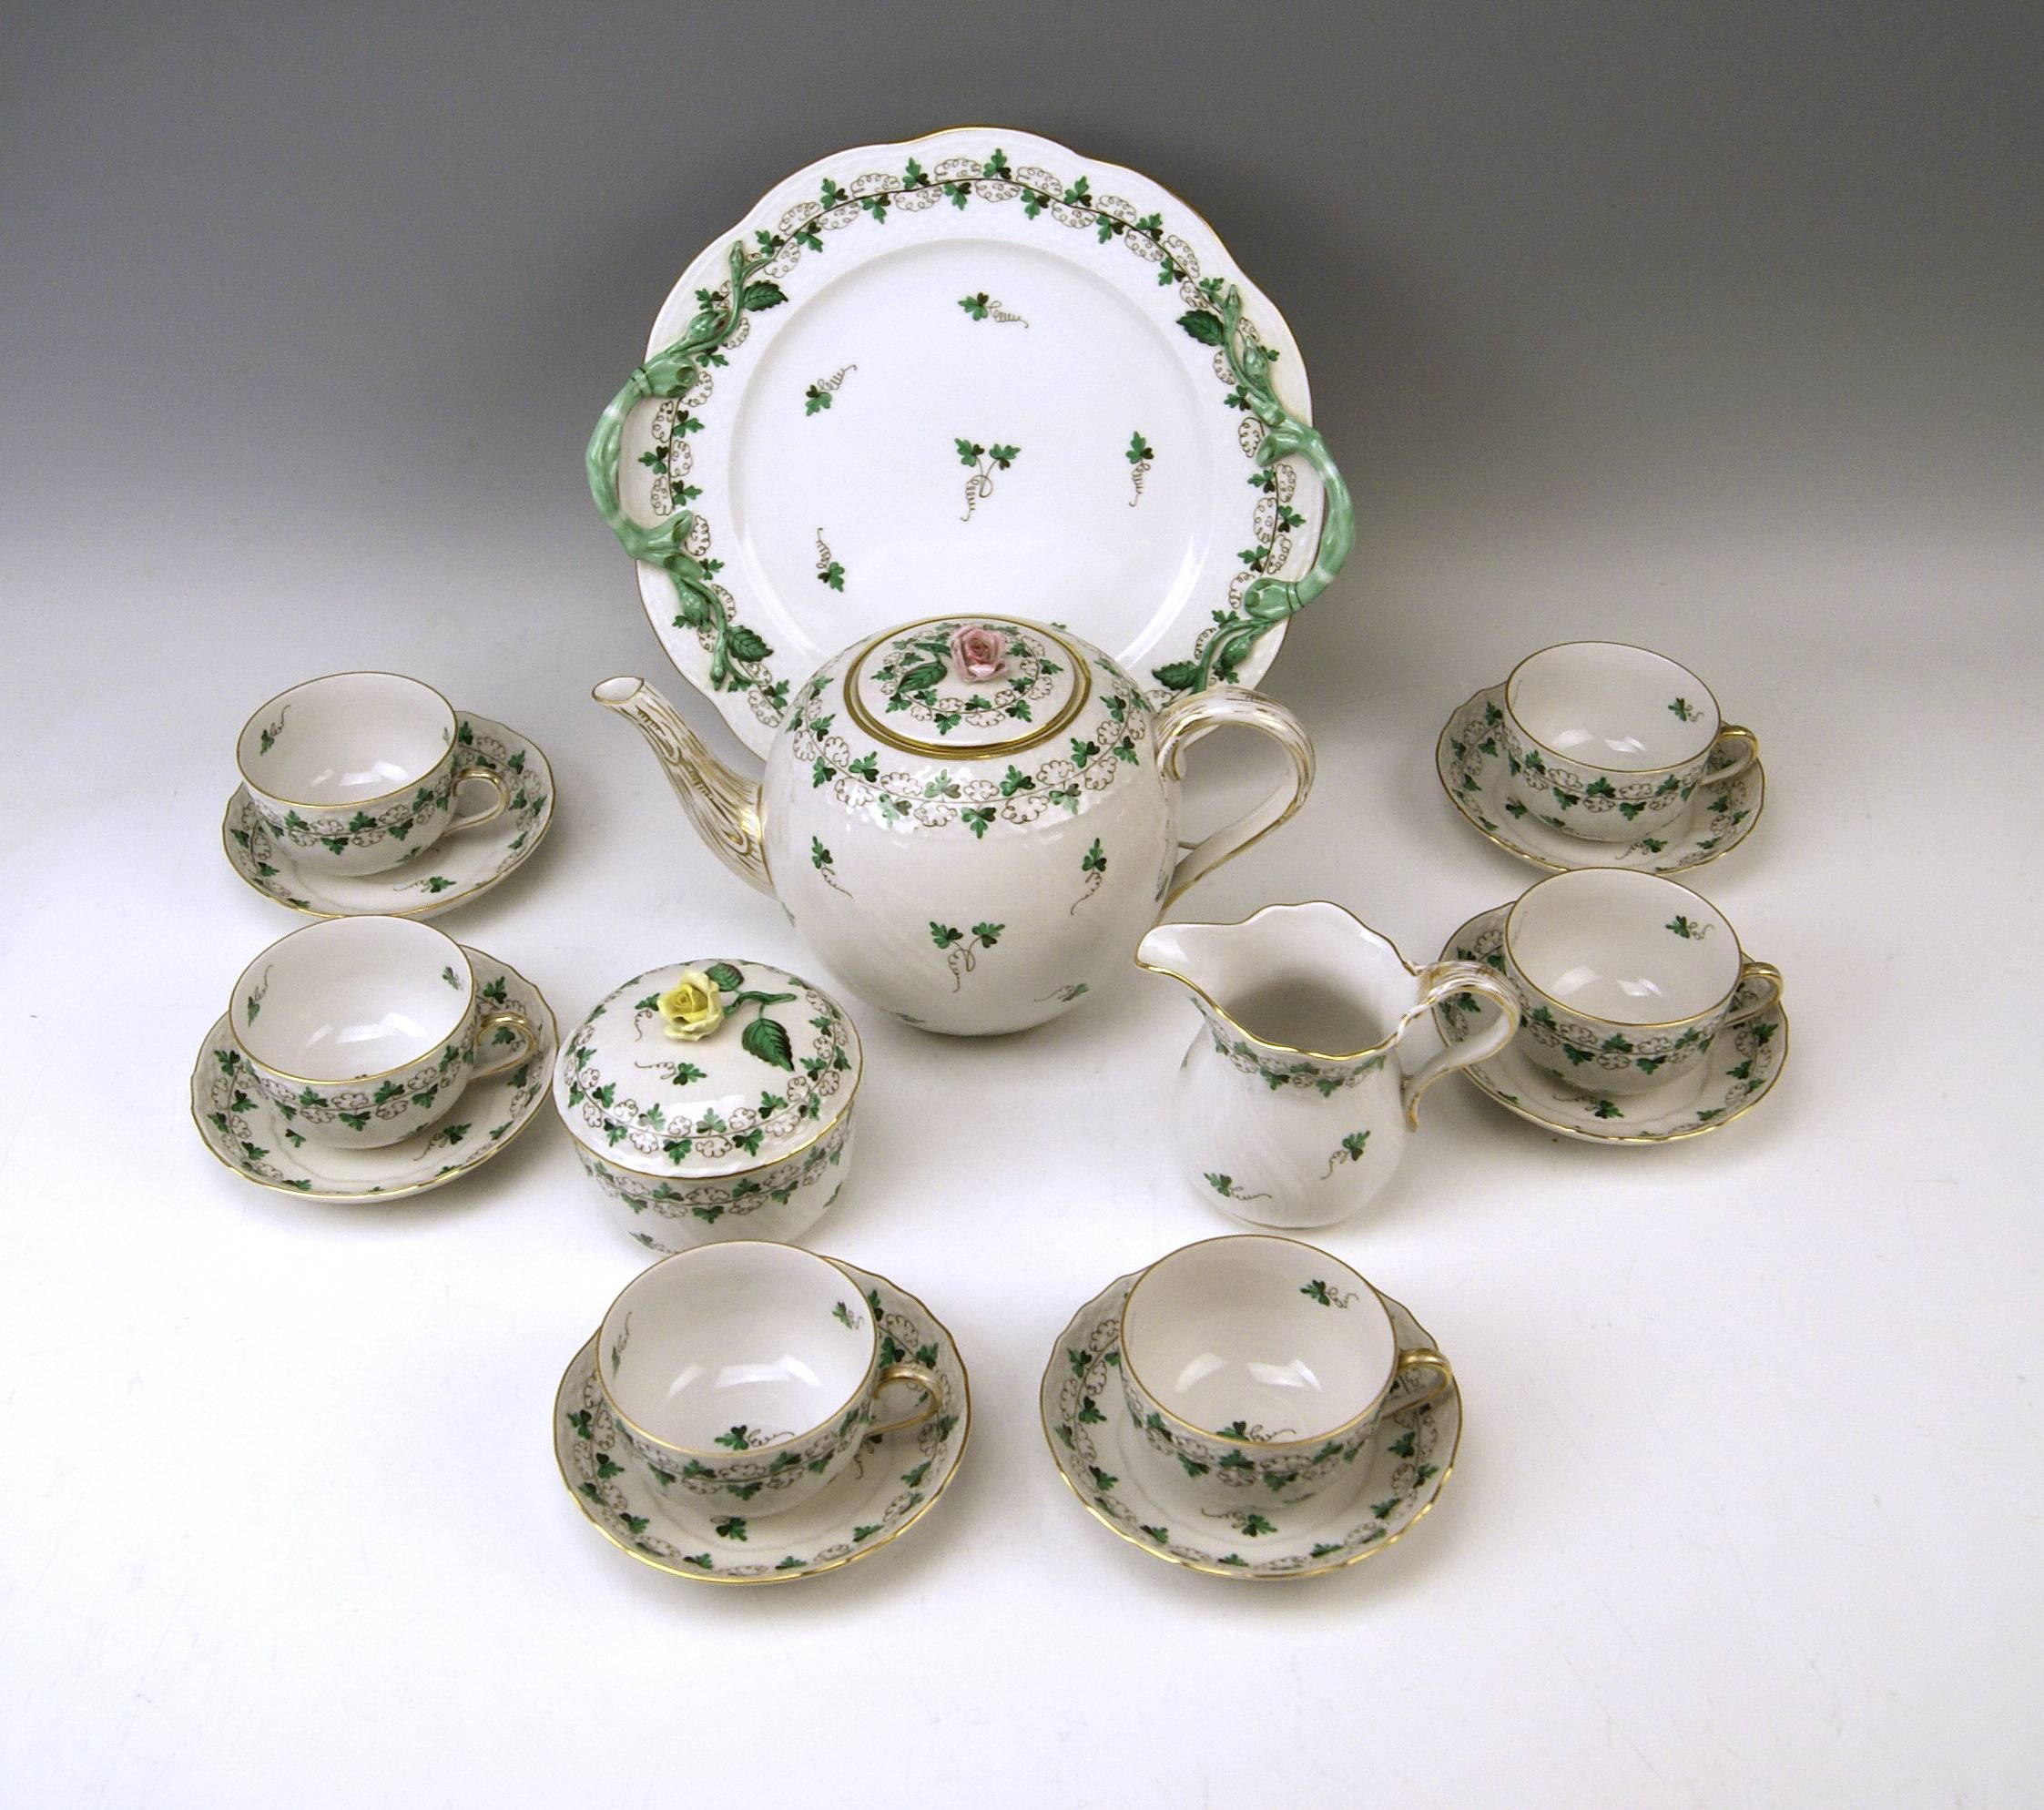 We invite you here to look at a splendid as well as nicest Herend tea set for six persons: 

This Herend tea set is of finest appearance due to its delicate green leaves paintings laid on white porcelain as well as due to golden painted edges.